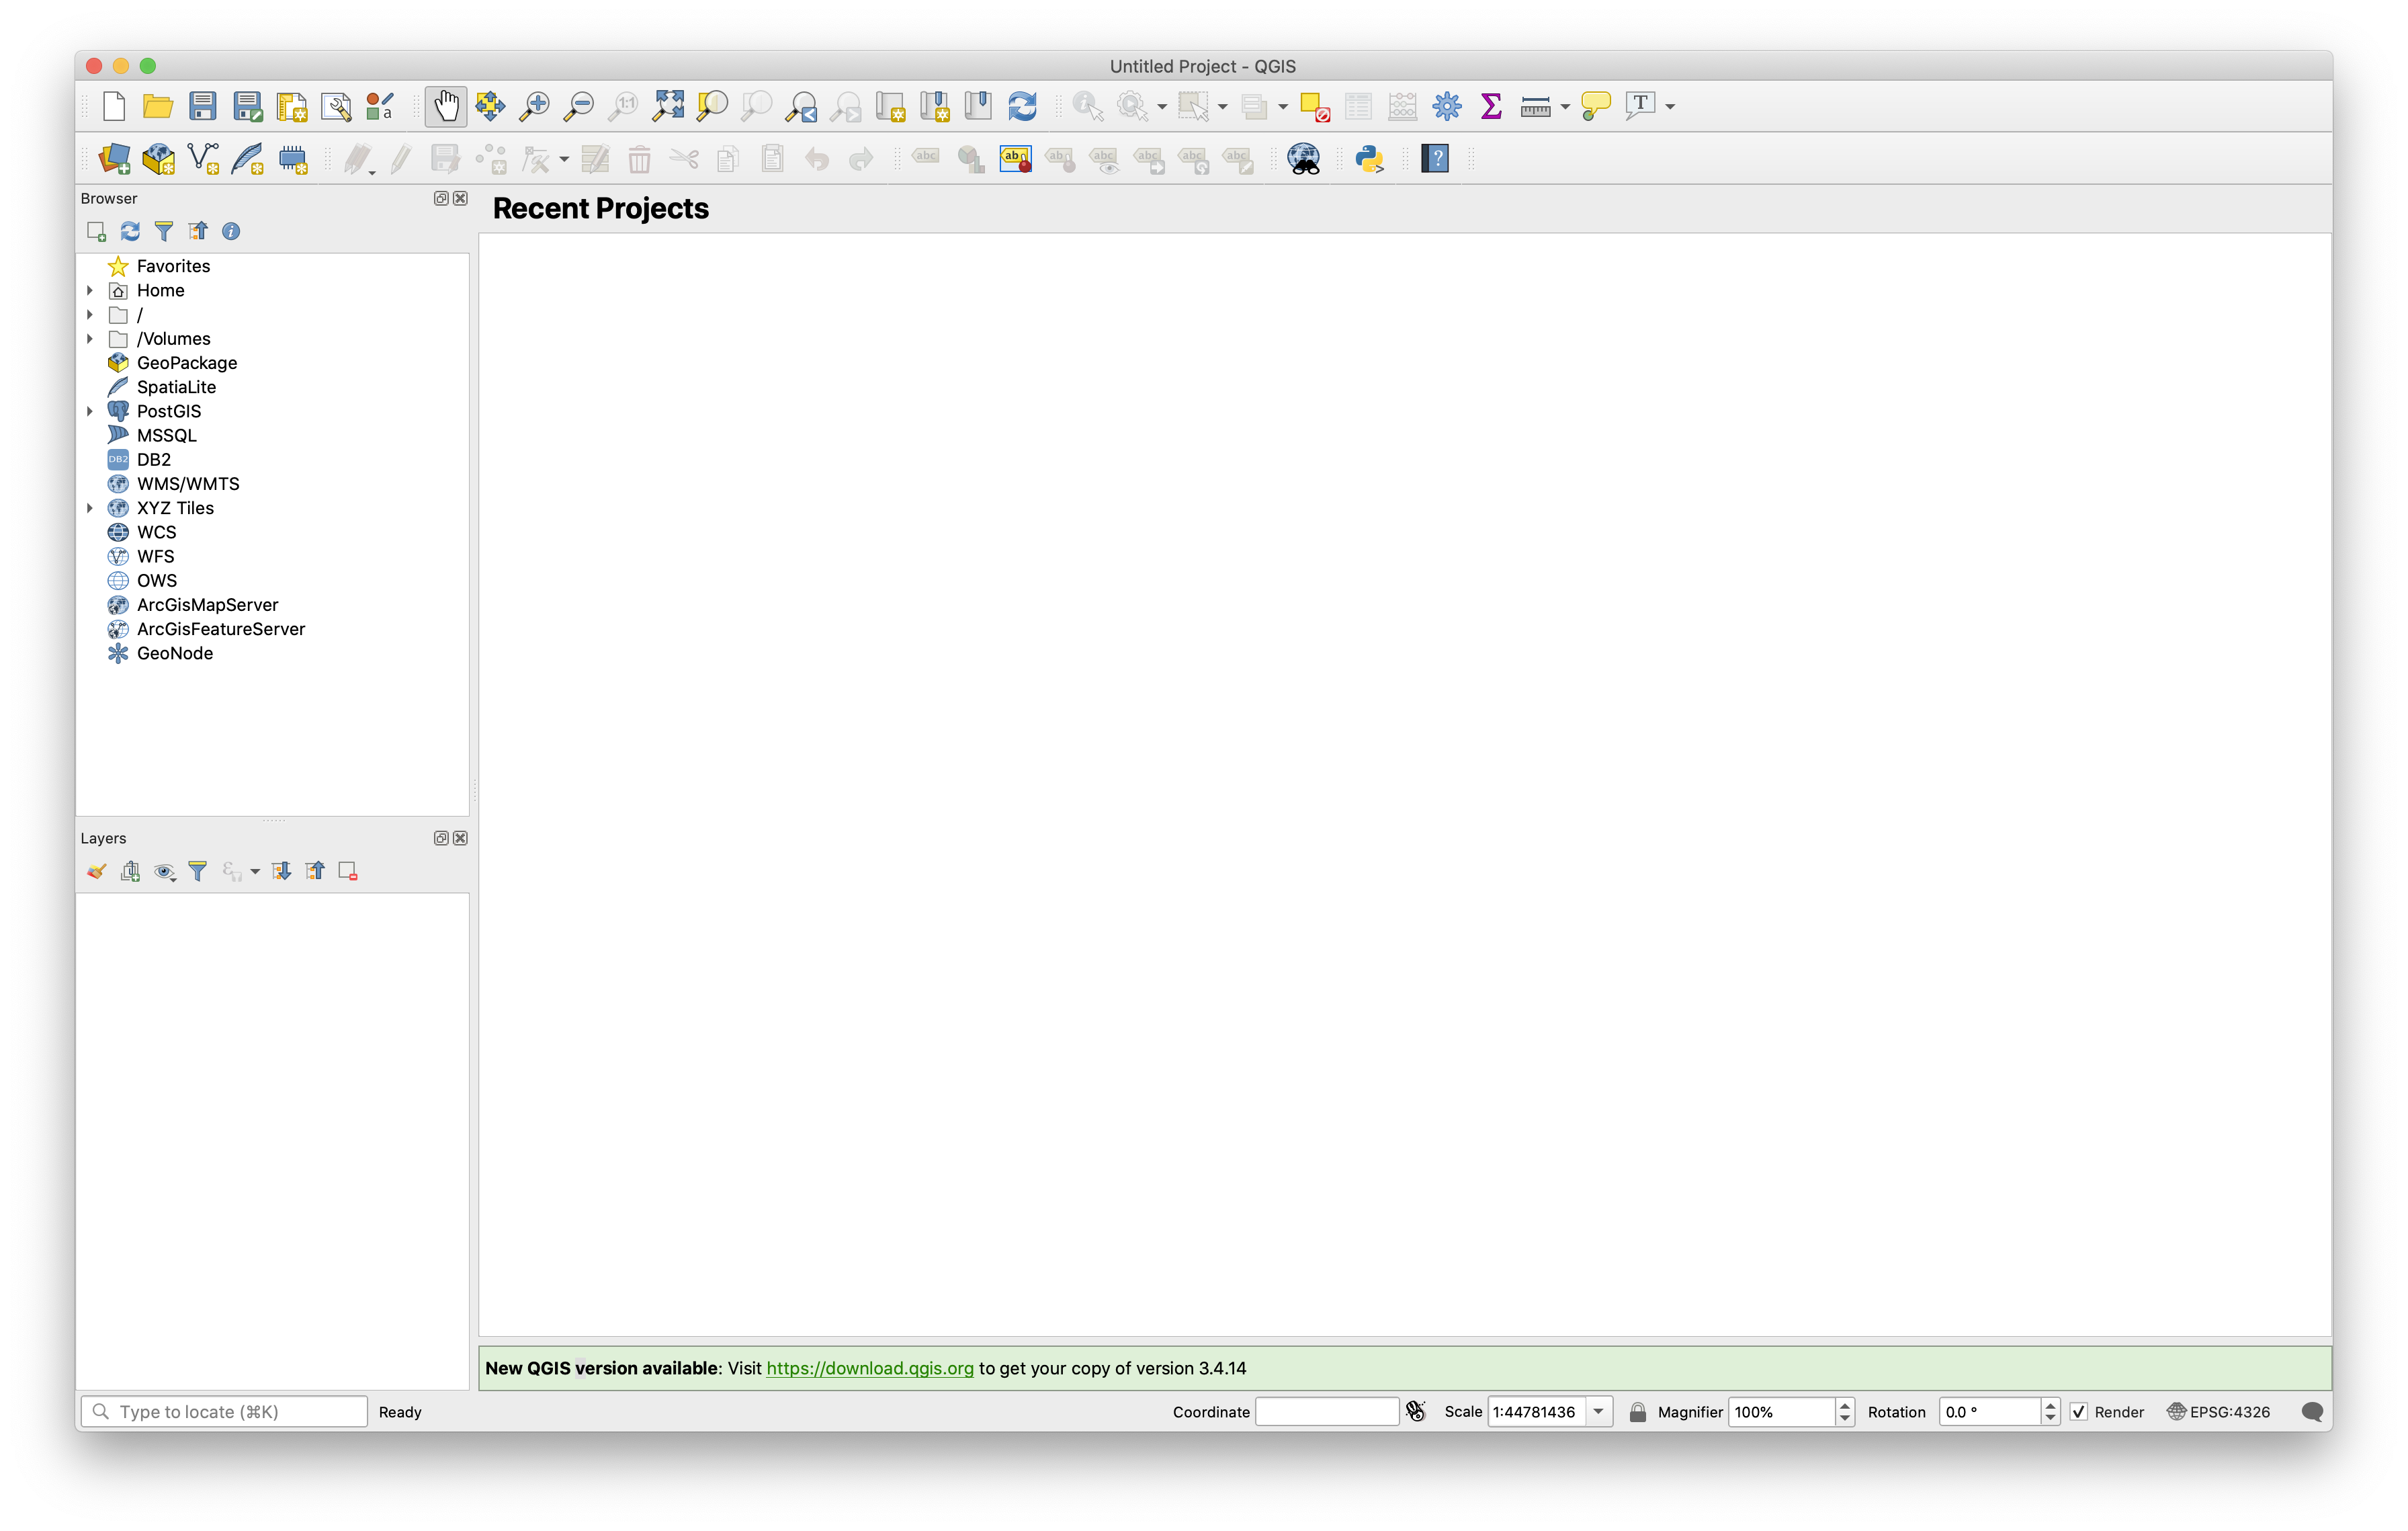 qgis blank screen on first open